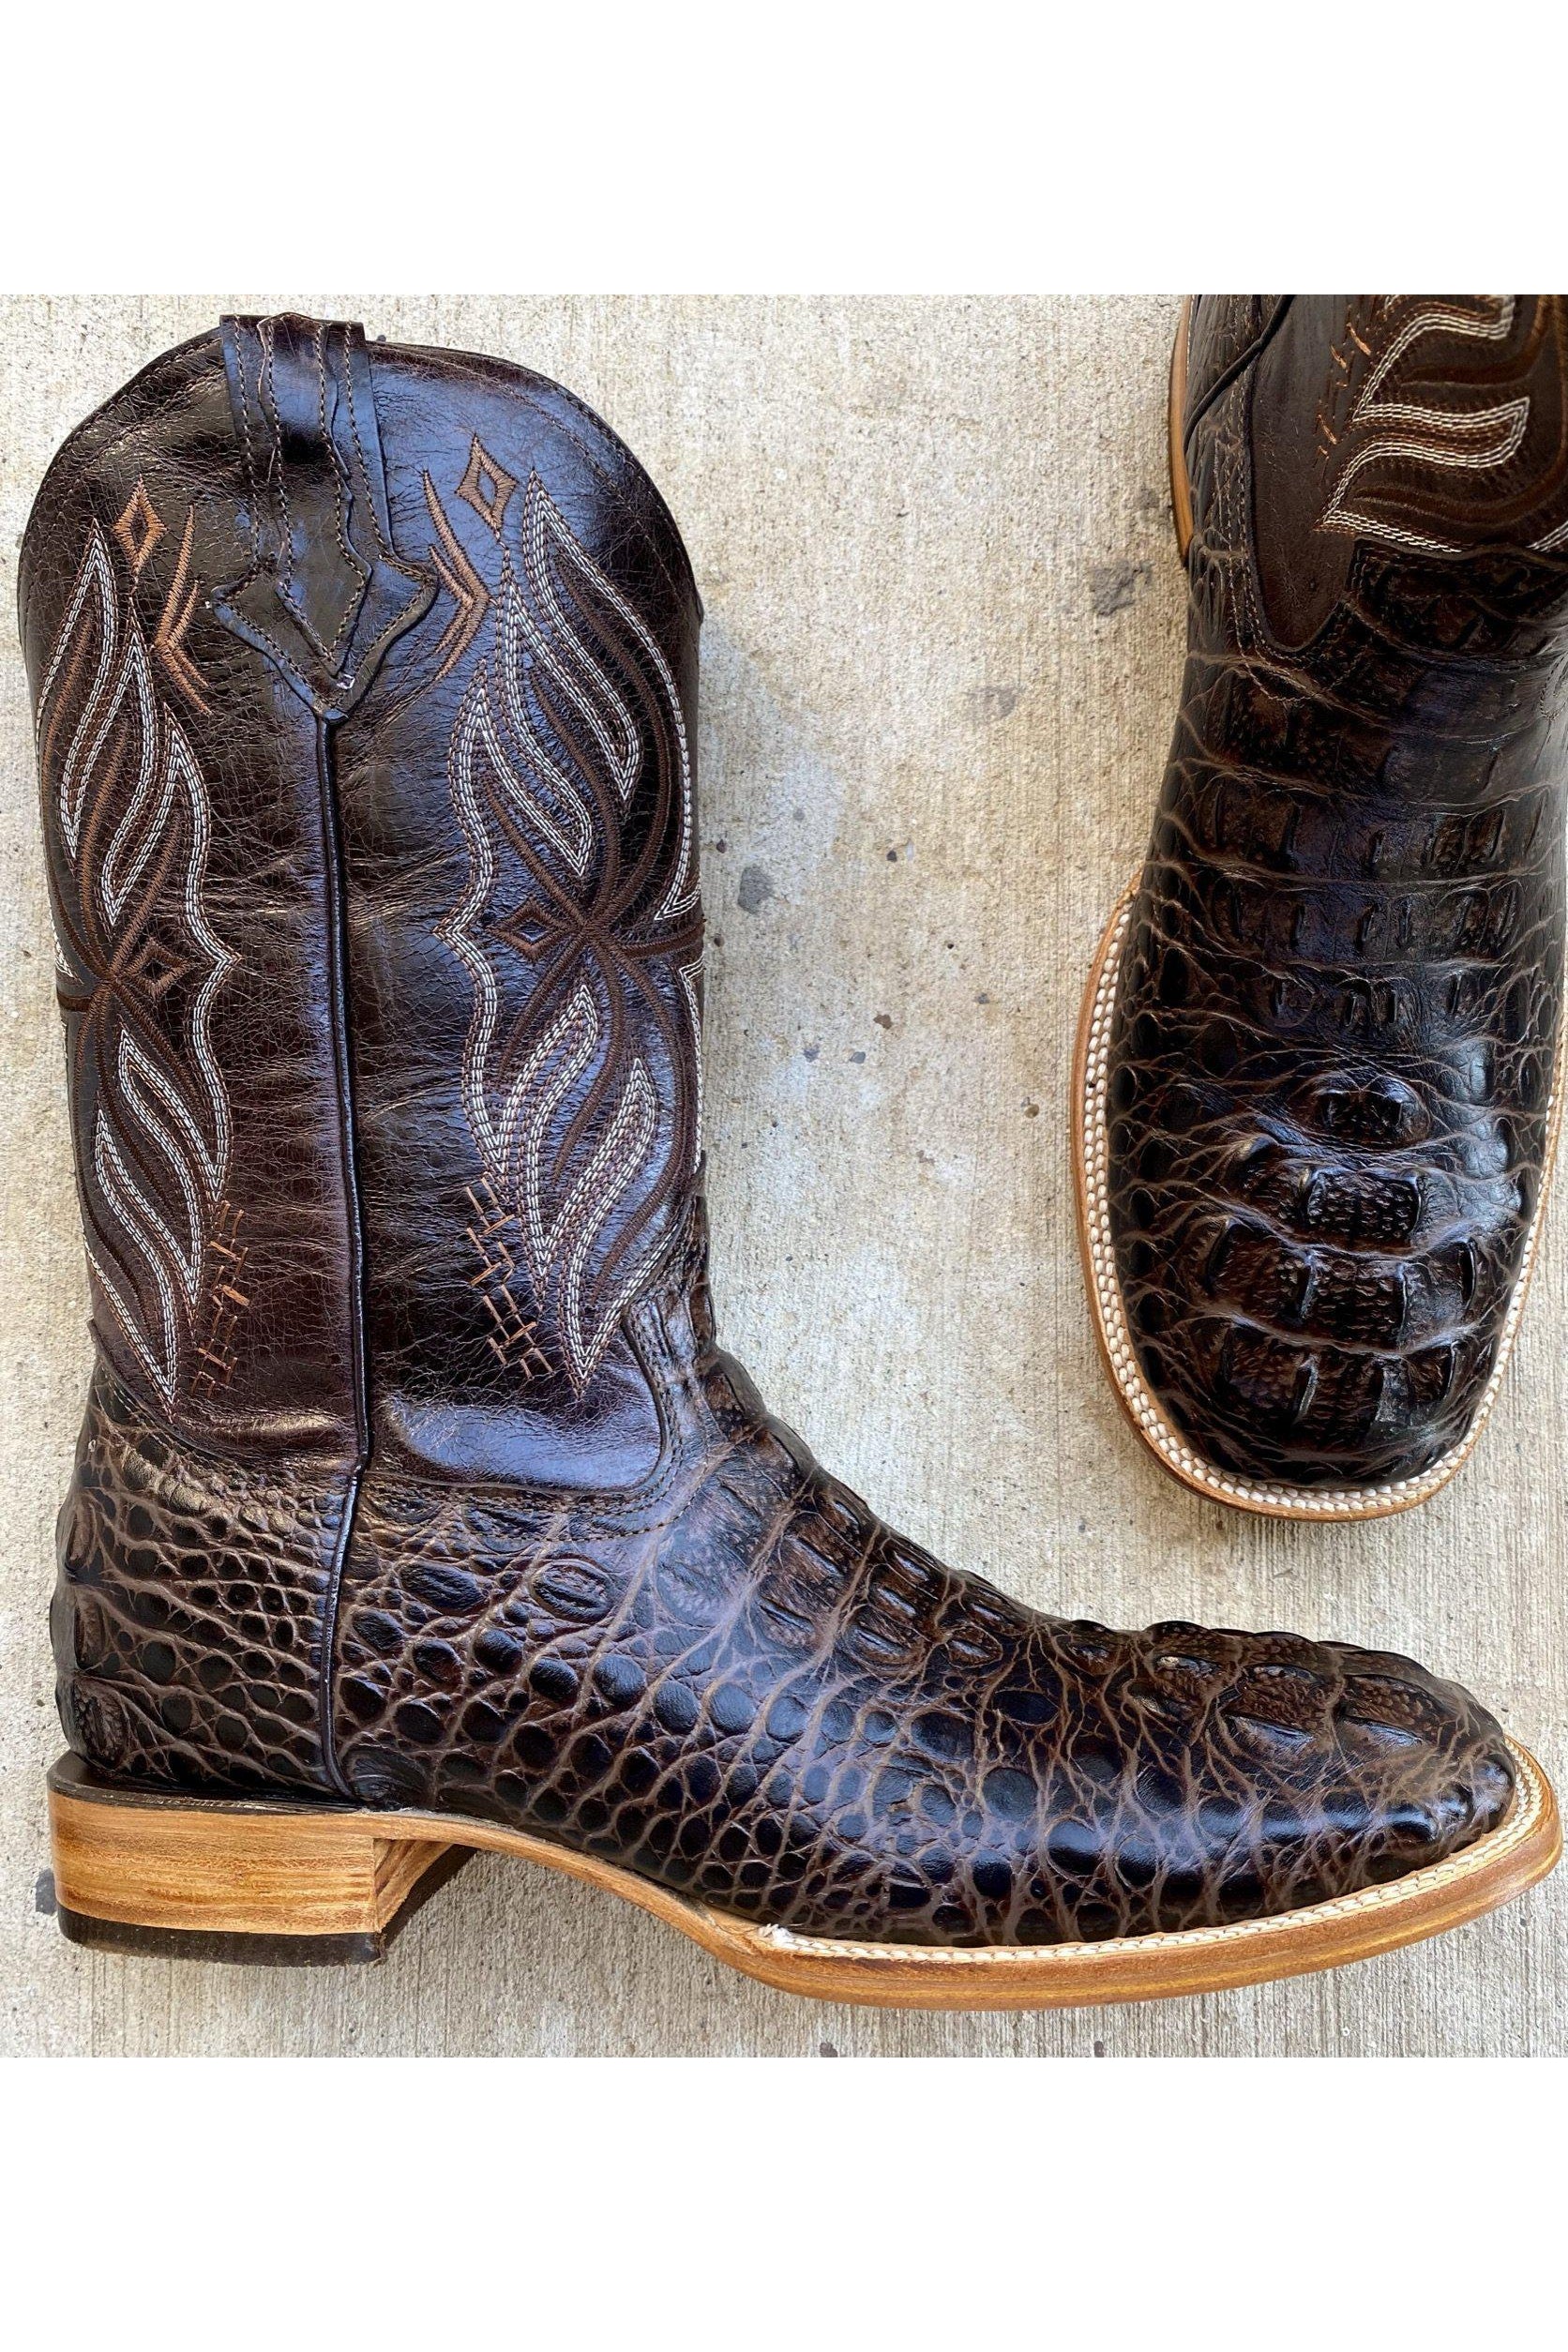 Cactus Exotic Men's Chocolate Dark Brown Caiman Belly Boots